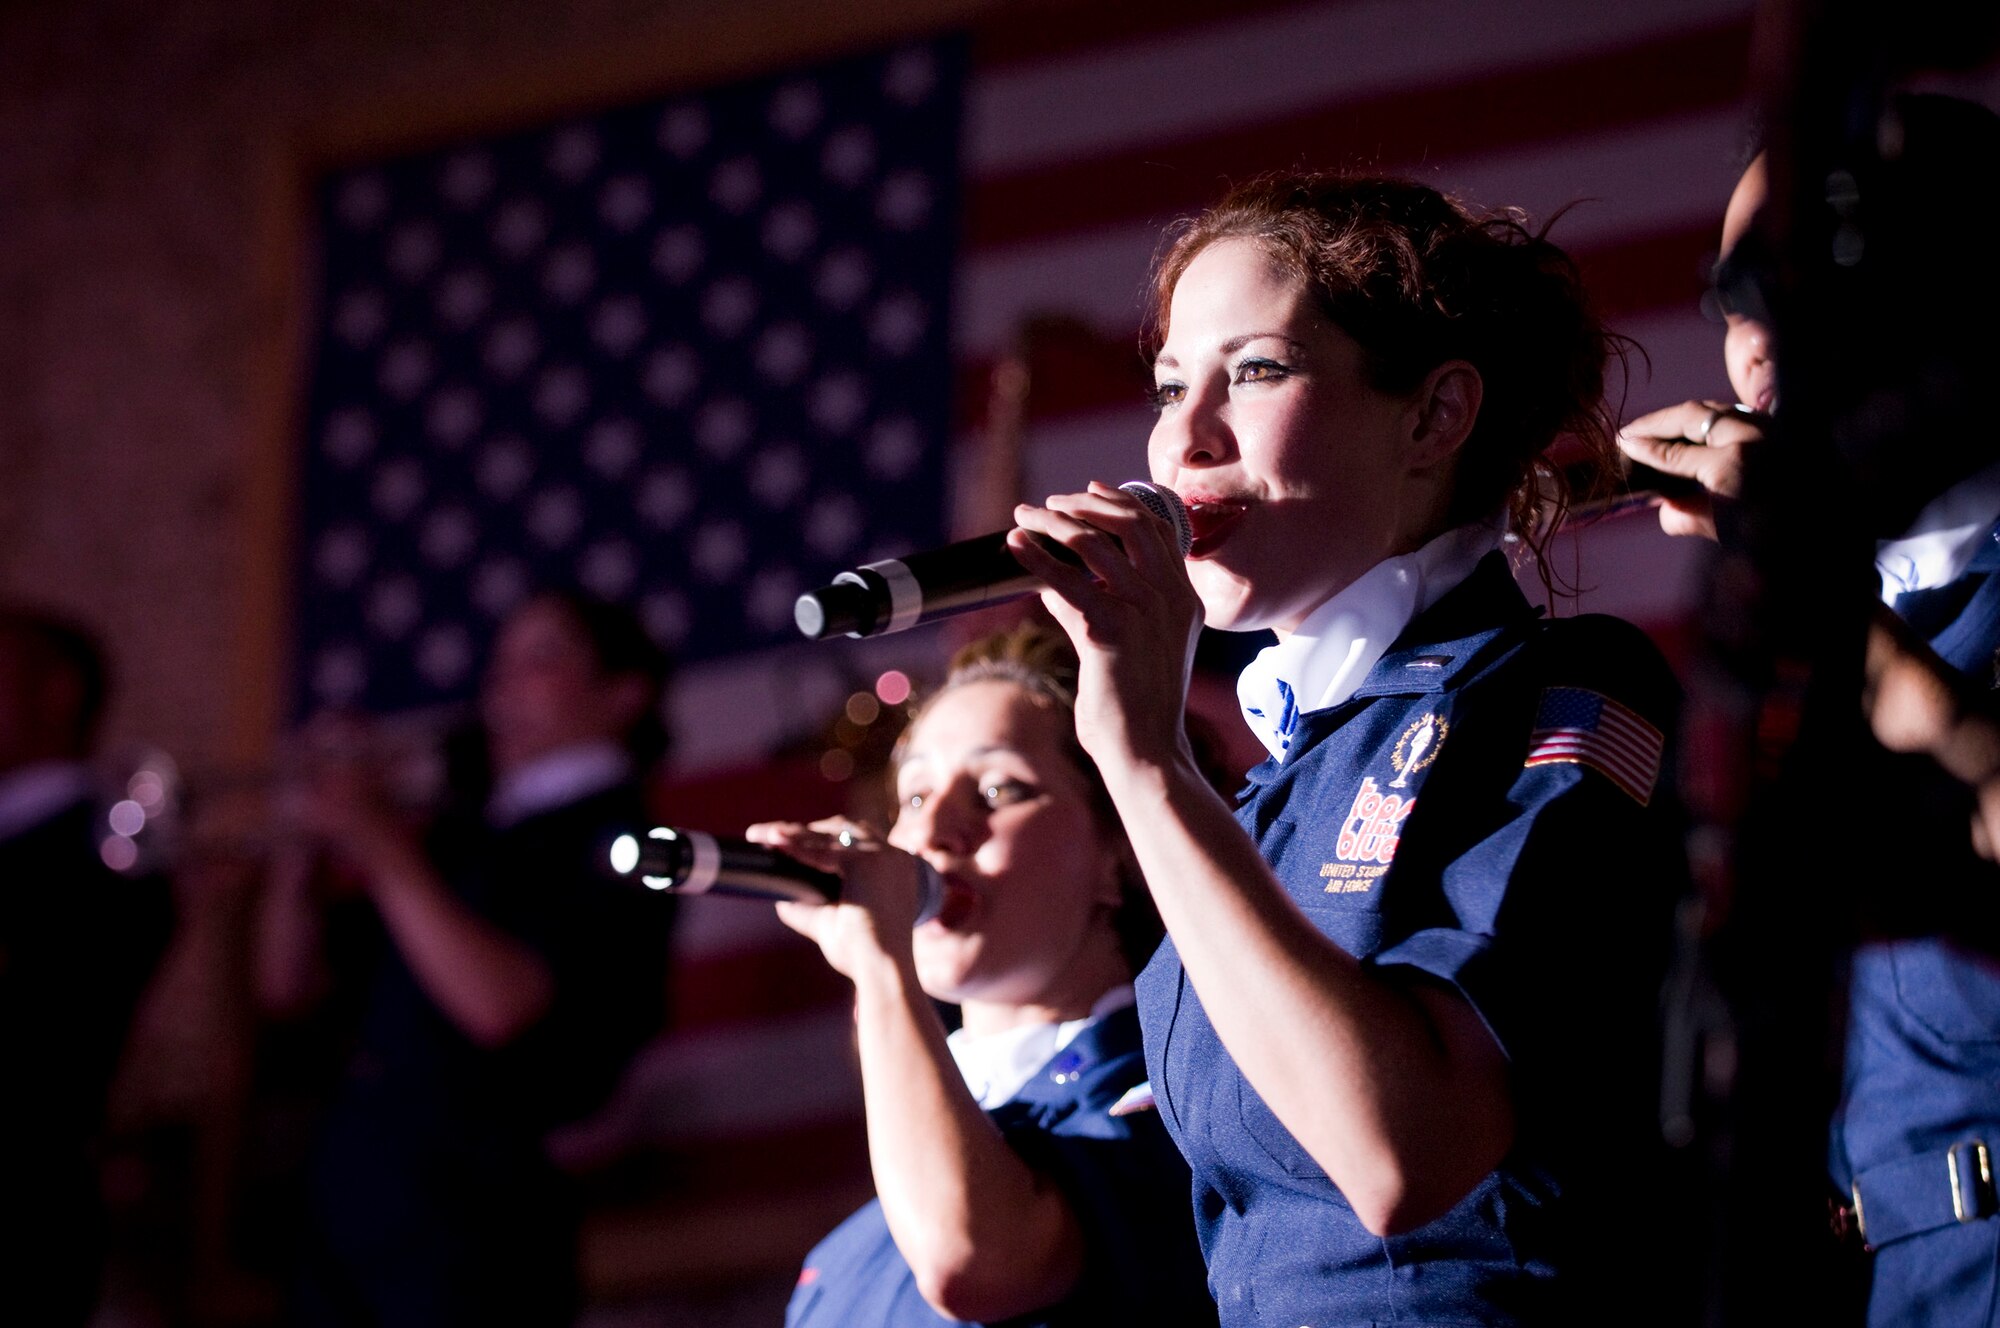 BAGRAM AIR FIELD, Afghanistan -- First Lt. Darci Day, vocalist for Tops in Blue, sings during a performance here on July 13, 2008. Lieutenant Day is an air battle manager and air weapons officer for the 960th Airborne Air Control Squadron, Tinker Air Force Base, Okla., and hails from Hot Springs, S.D. (U.S. Air Force photo by Staff Sgt. Samuel Morse)